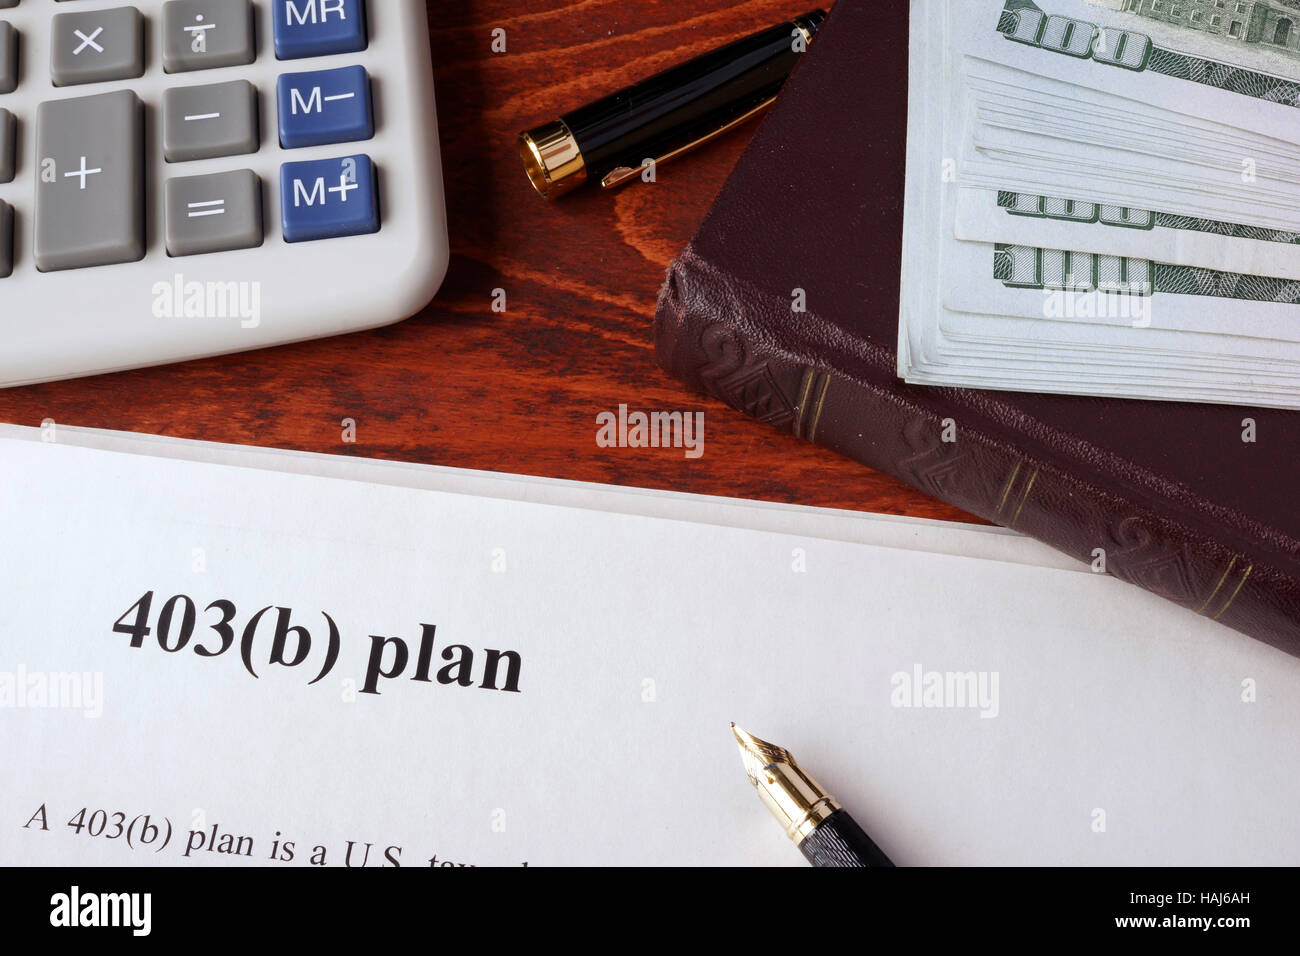 Papers with 403(b) Plan and book on a table. Stock Photo